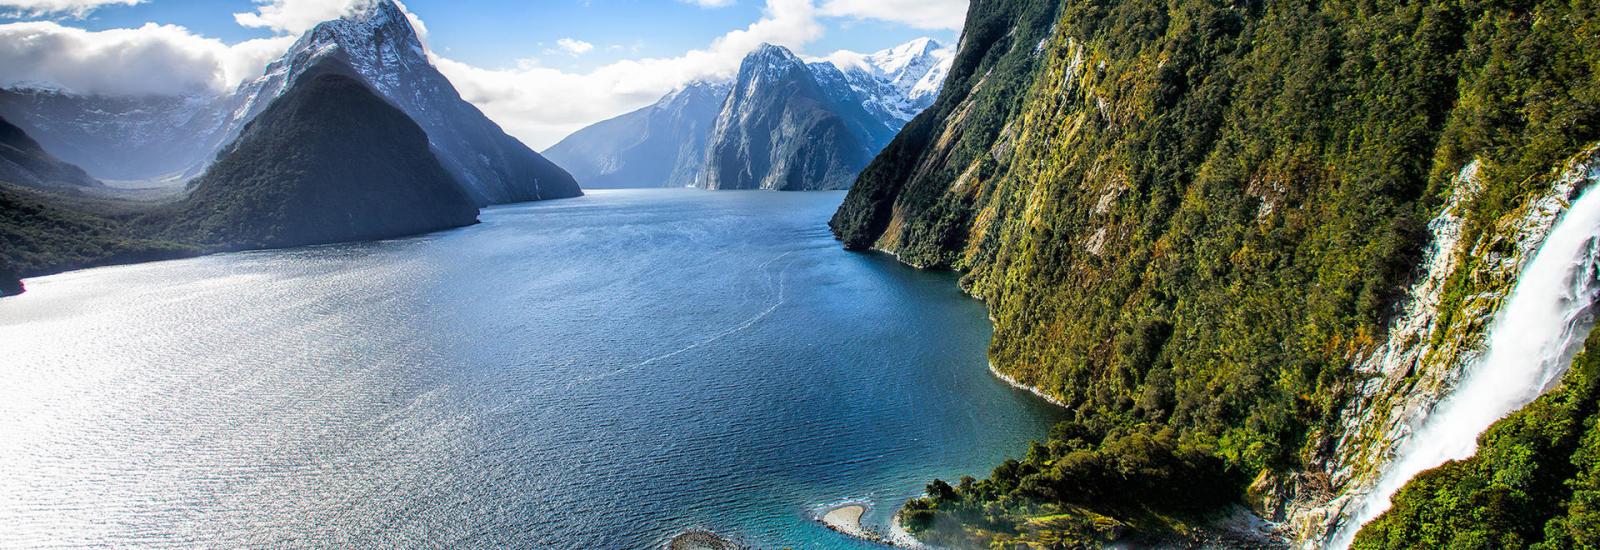 Fiordland with its steep sheer faced granite walls.